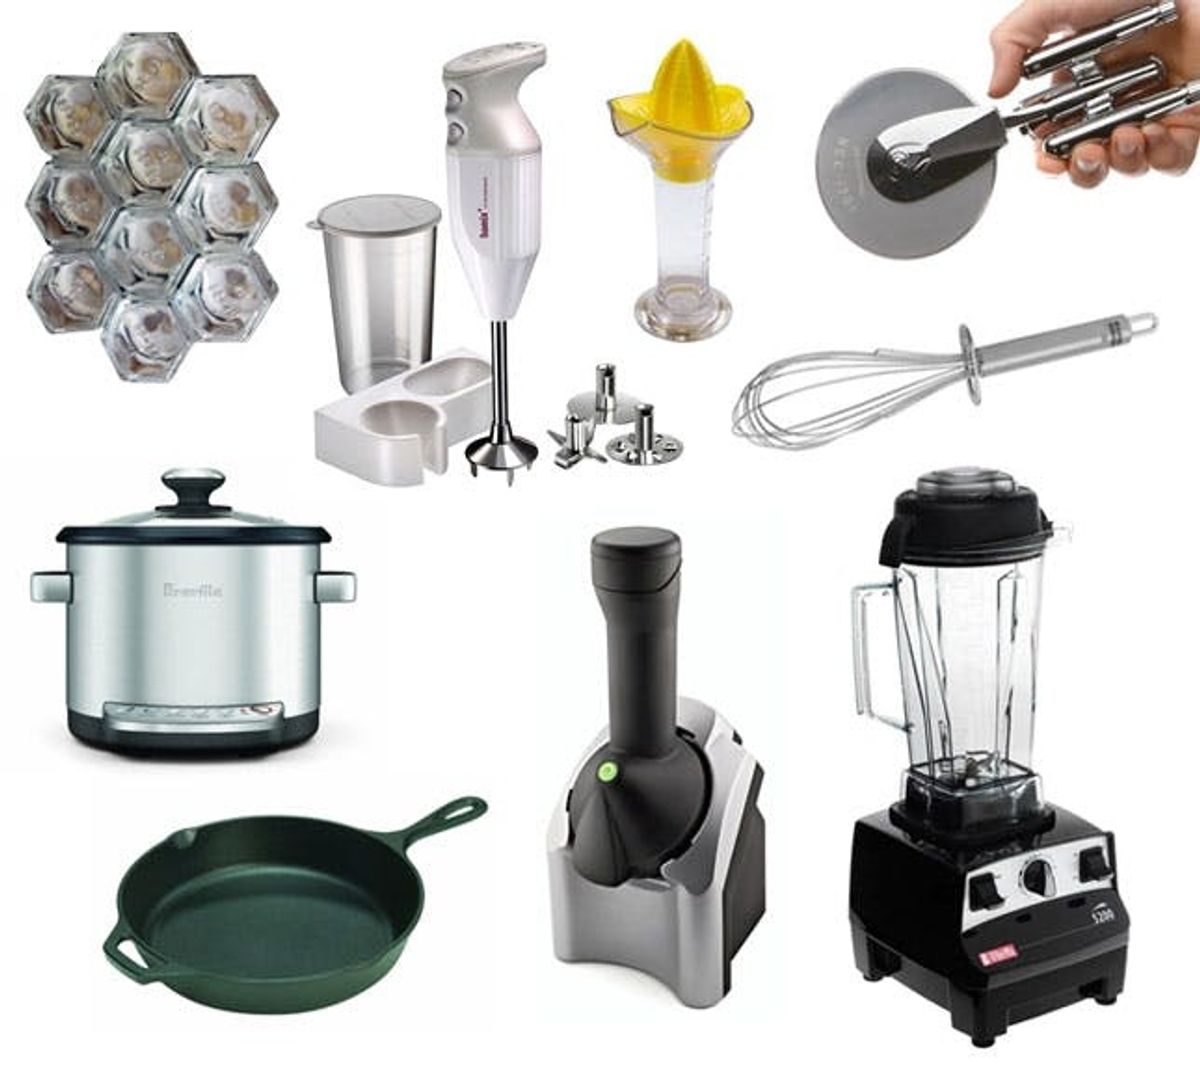 We Asked, You Answered: 10 Must-Have Kitchen Gadgets